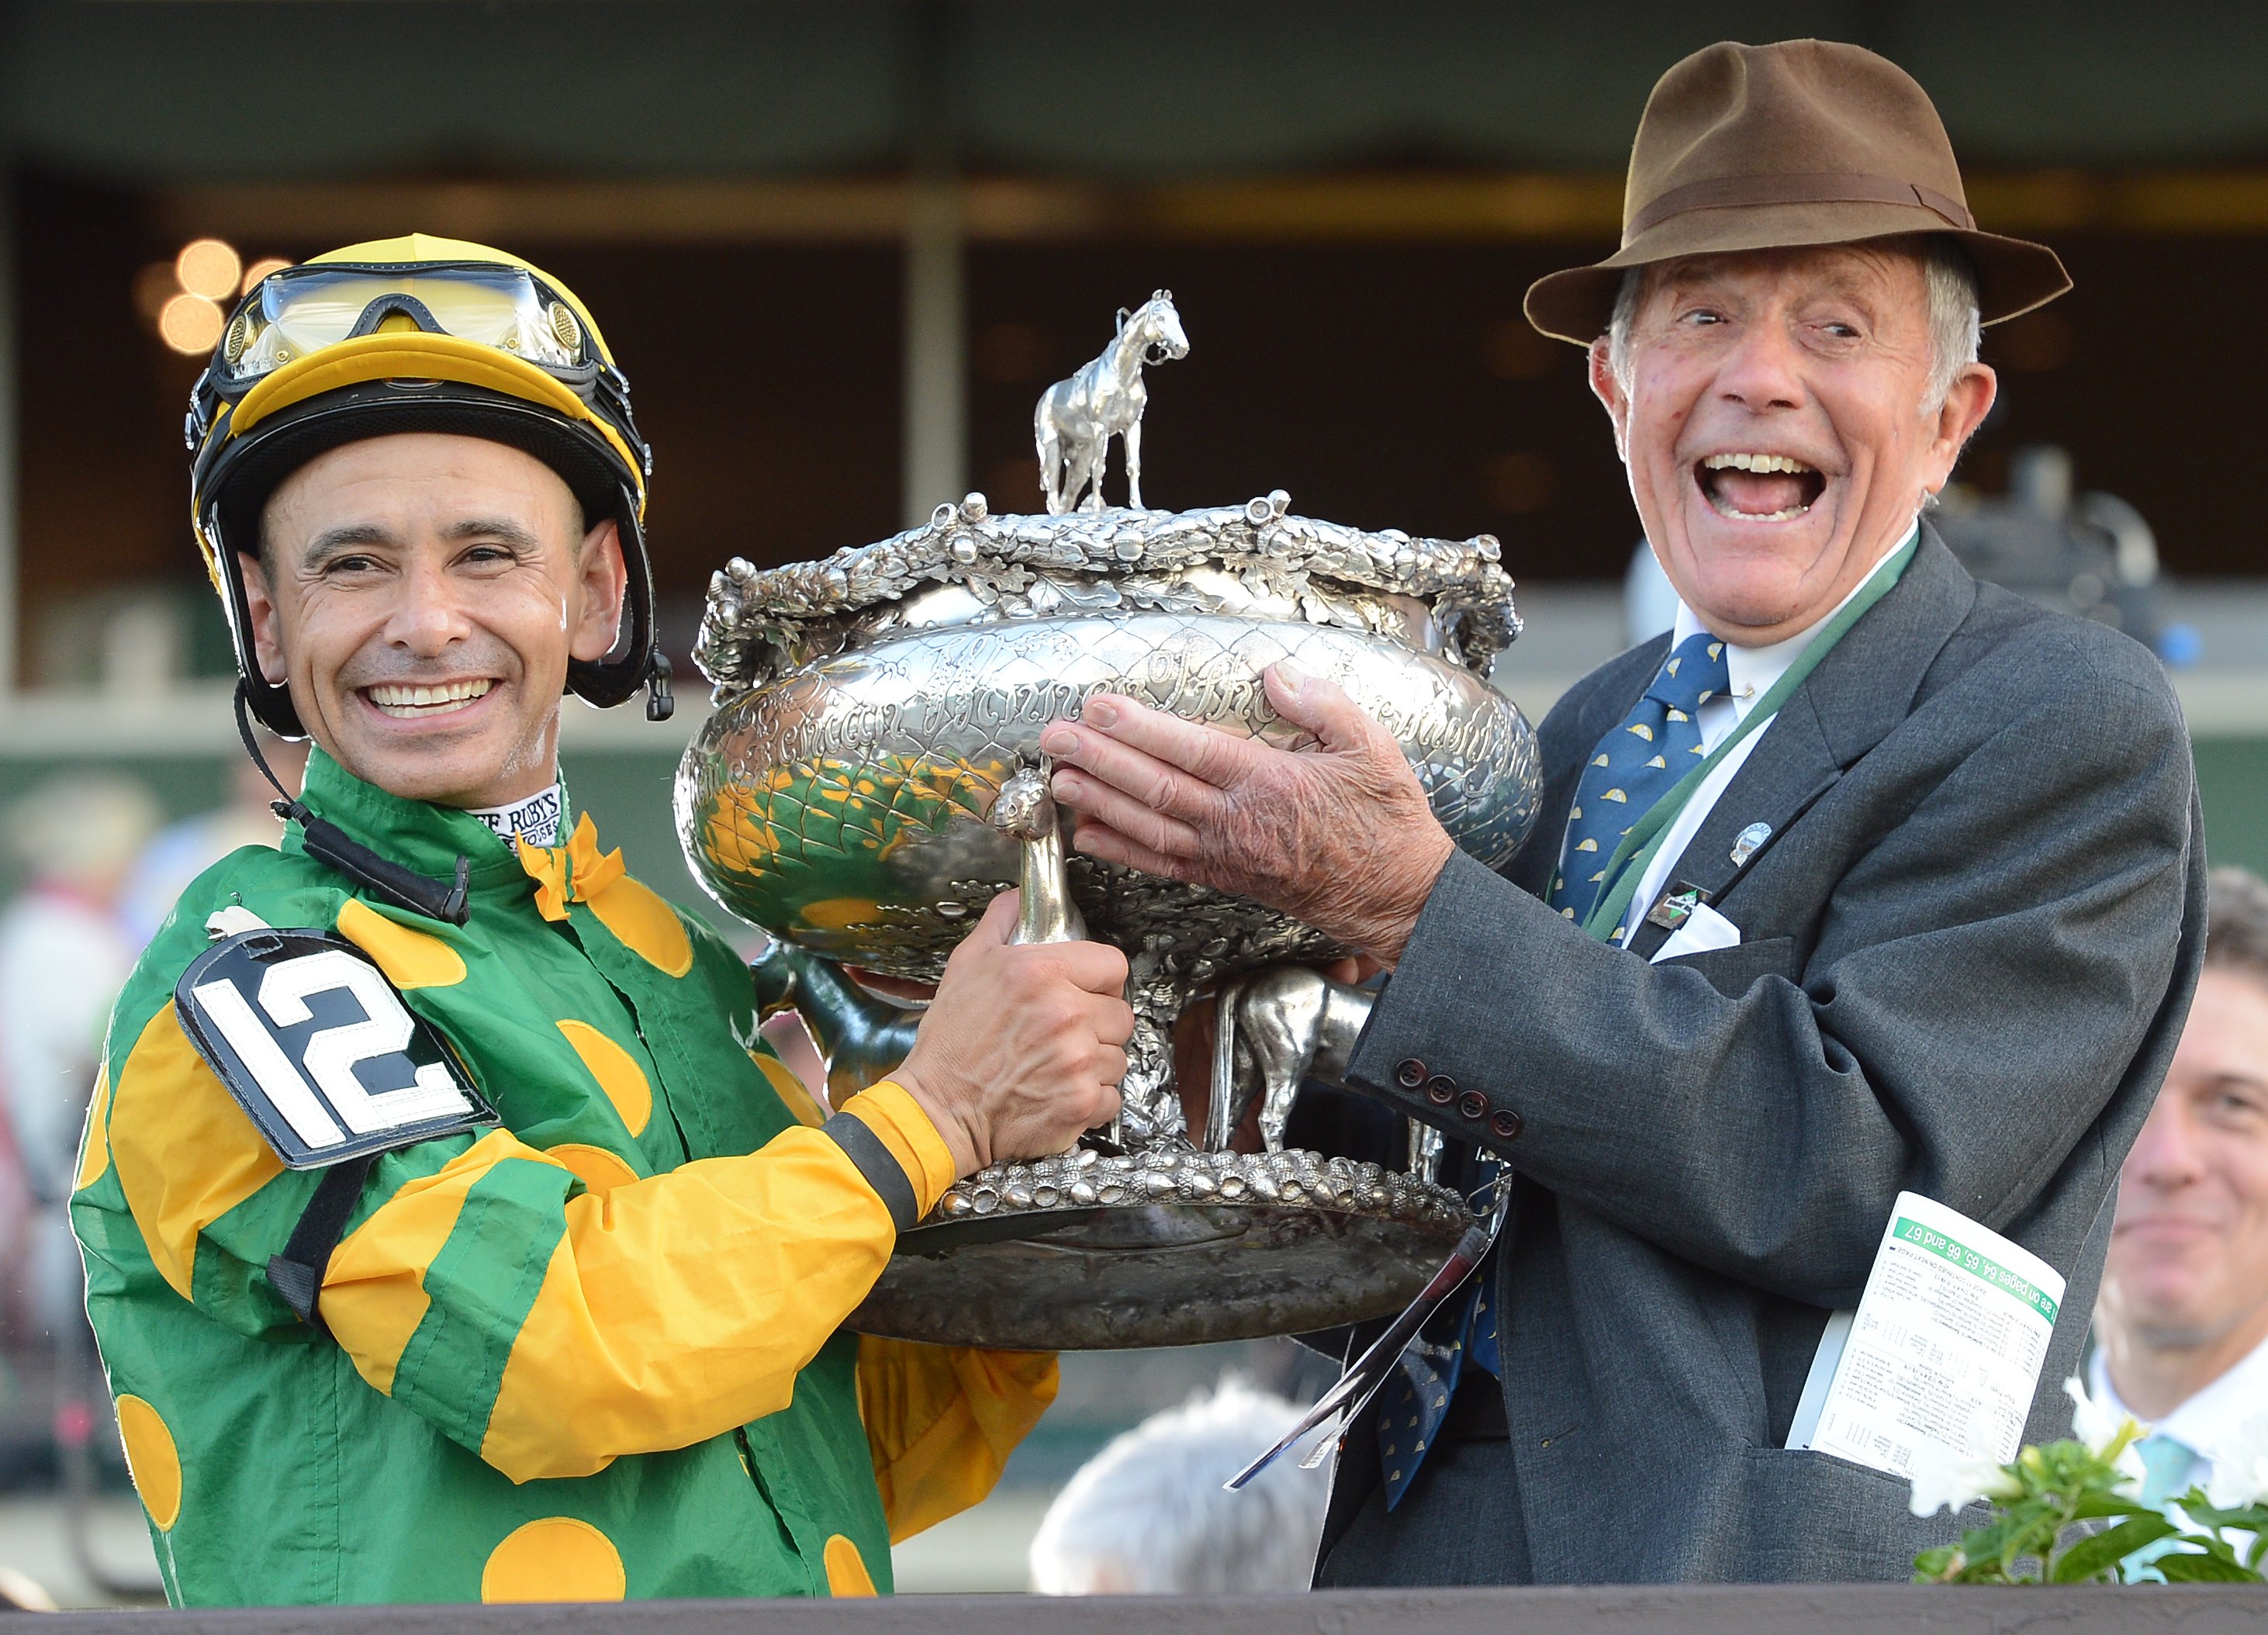 Mike Smith and Cot Campbell raise the August Belmont Memorial Trophy in celebration of Palace Malice's 2013 Belmont Stakes victory (NYRA)